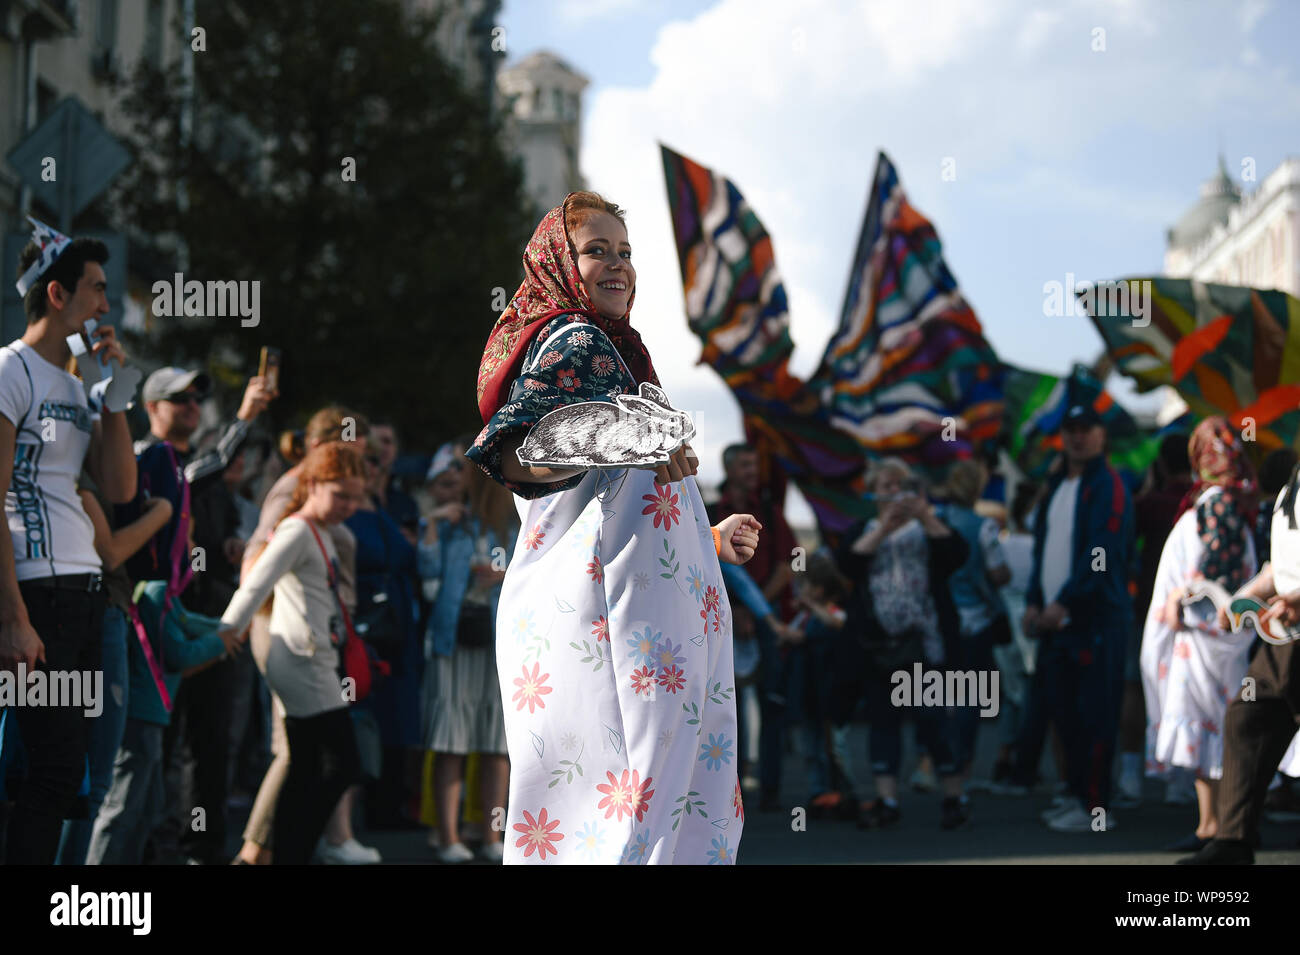 Moscow, Russia. 7th Sep, 2019. An artist performs during the Moscow City day event celebrations in Moscow, Russia, on Sept. 7, 2019. Moscow celebrated its 872nd anniversary to honor the city's founding this weekend. Credit: Evgeny Sinitsyn/Xinhua/Alamy Live News Stock Photo